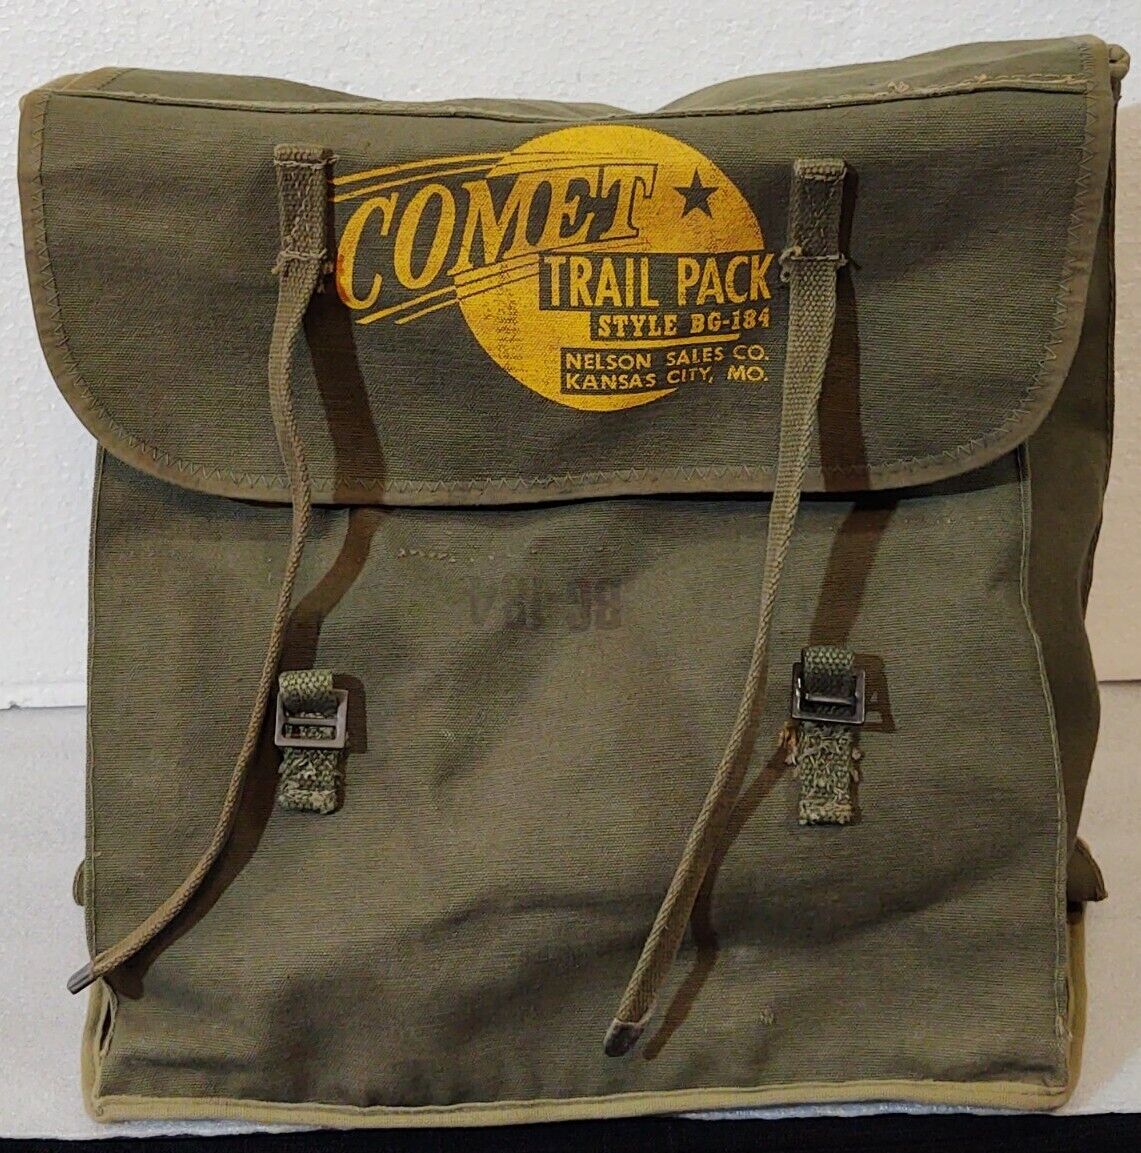 Vintage RARE Comet Trail Pack Canvas Backpack Nelson Sales Co Style BG-184 USA